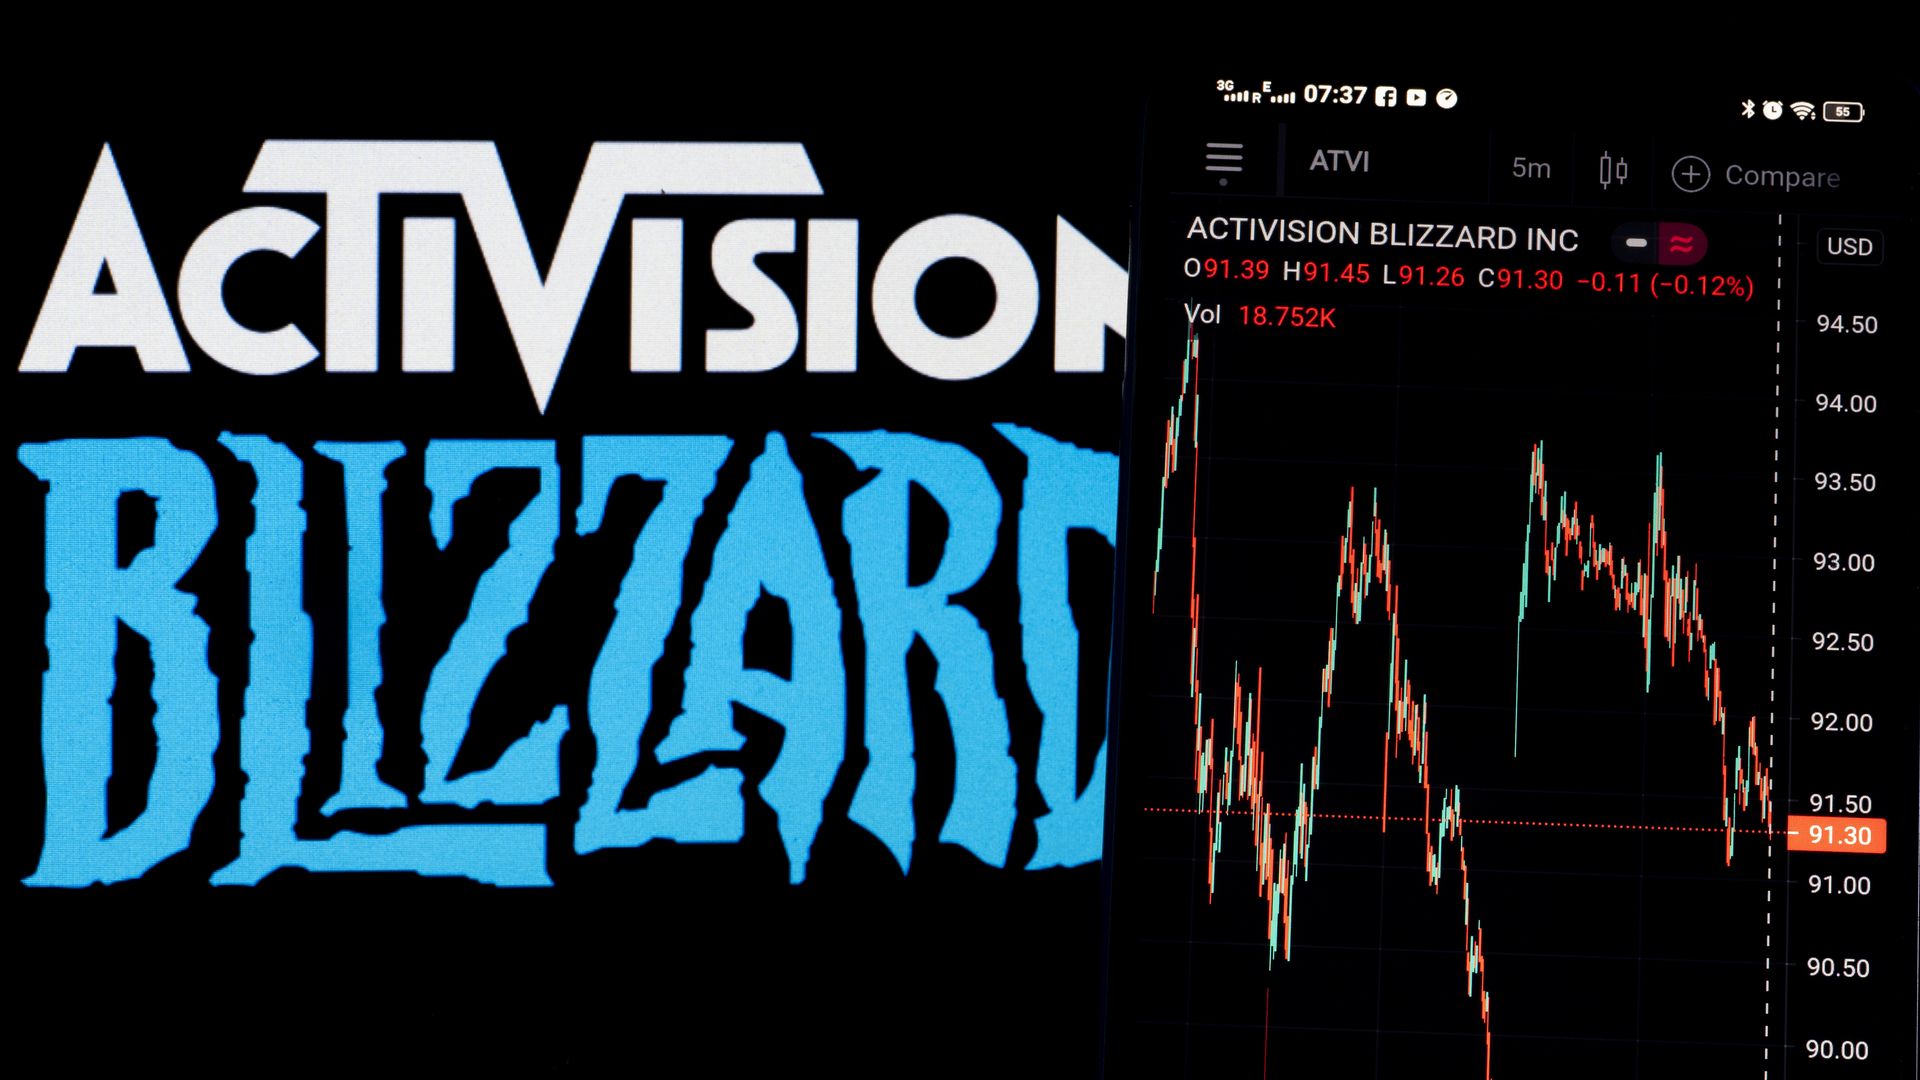 Photo illustration of Activision Blizzard logo and a chart of its stock price